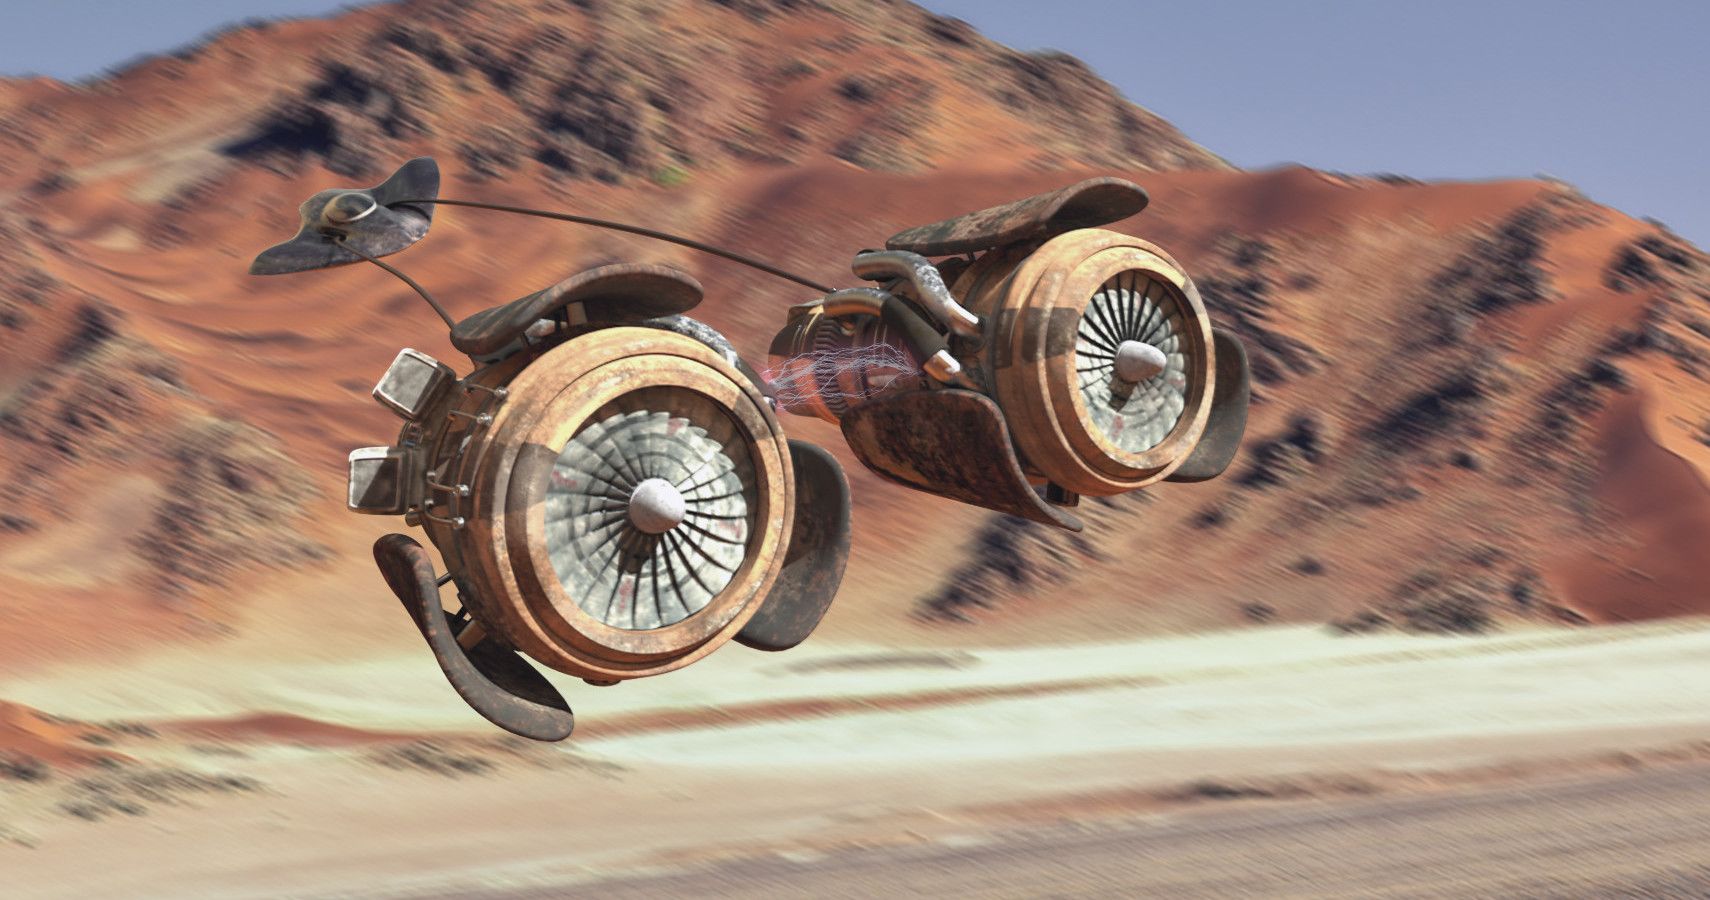 Star Wars 10 Things You Didn't Know About Pod Racing